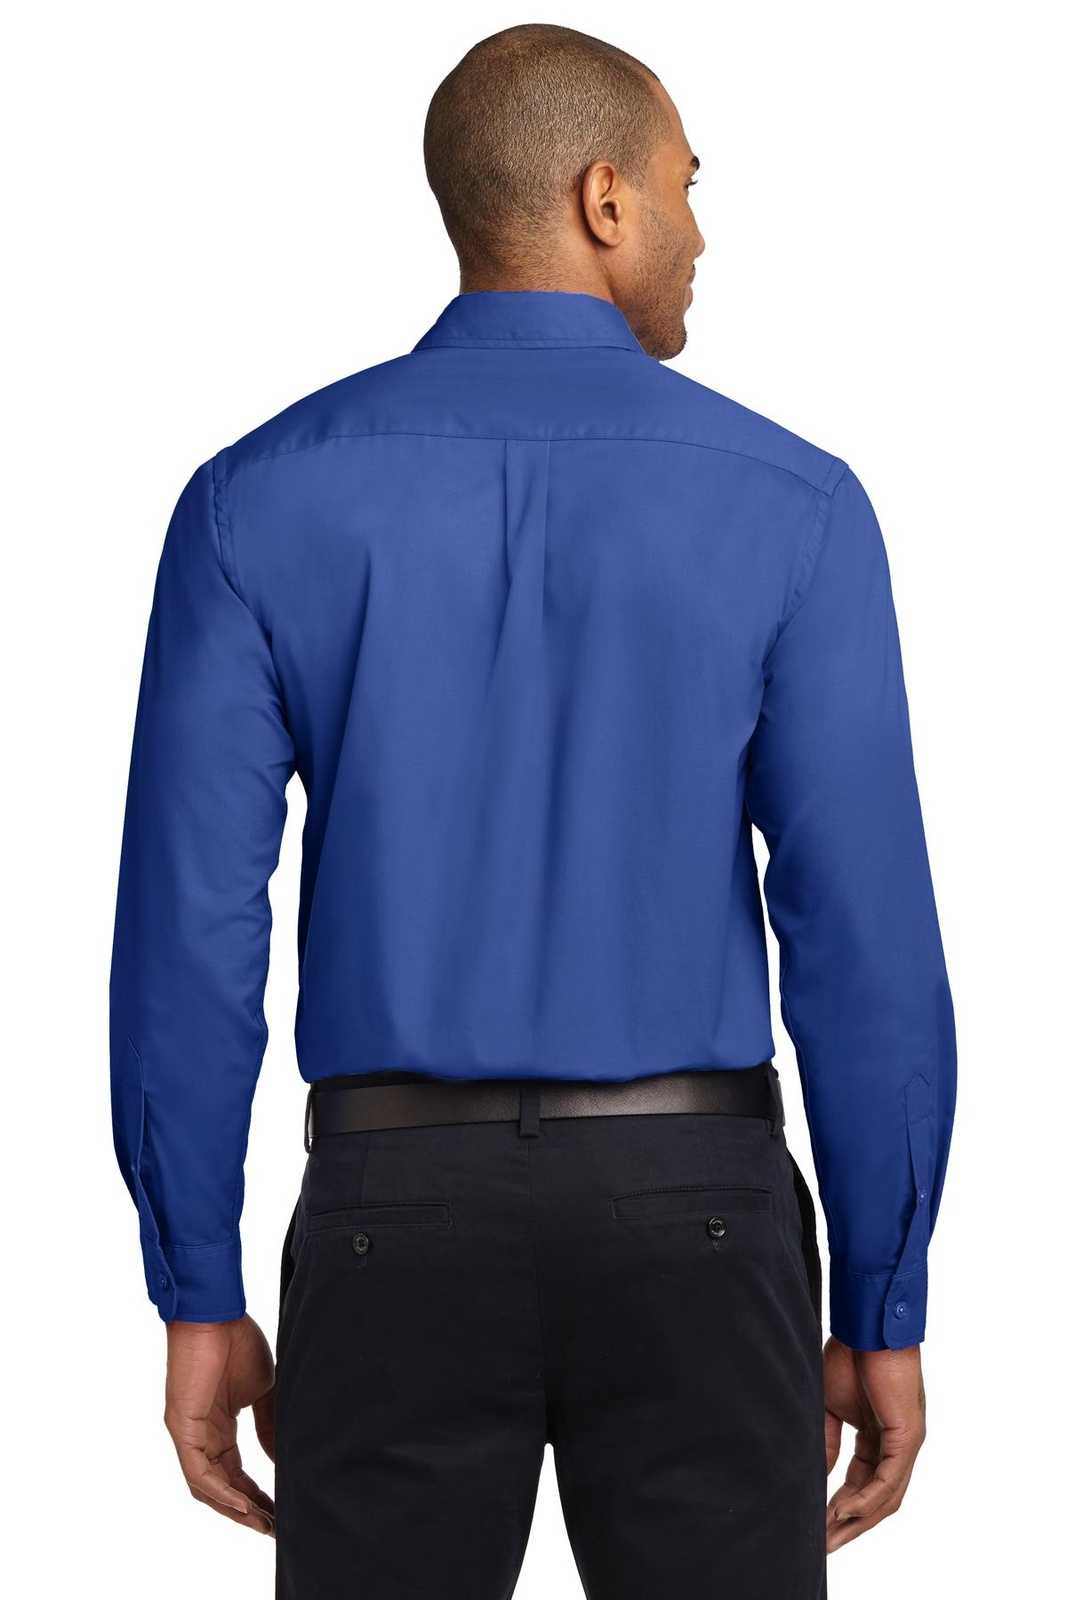 Port Authority S608 Long Sleeve Easy Care Shirt - Royal Classic Navy - HIT a Double - 2